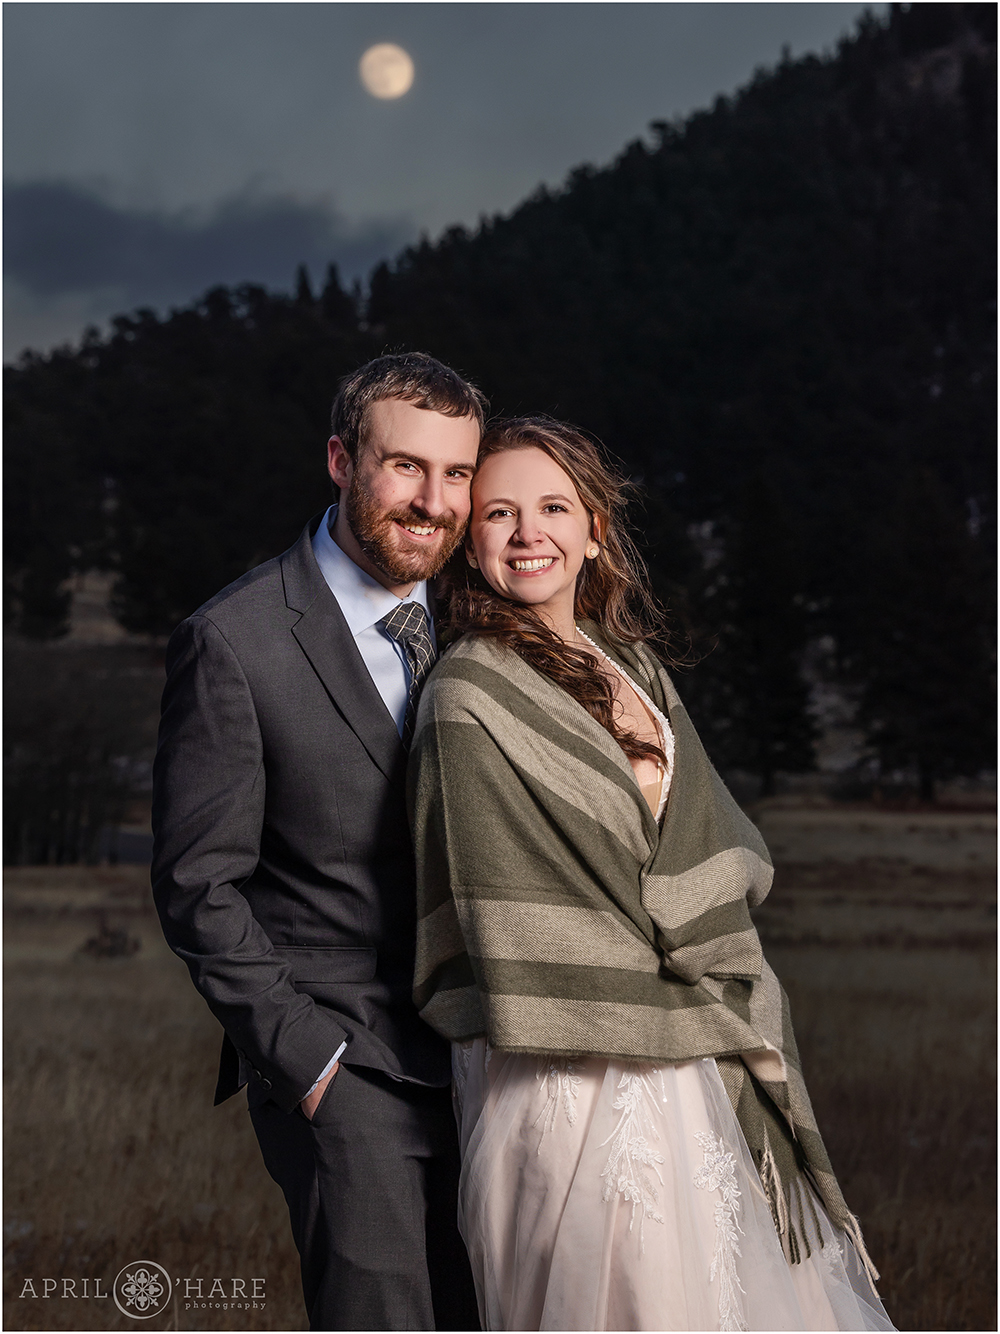 Awesome full moon wedding photo with a chilly couple at their winter wedding inside Rocky Mountain National Park in Colorado